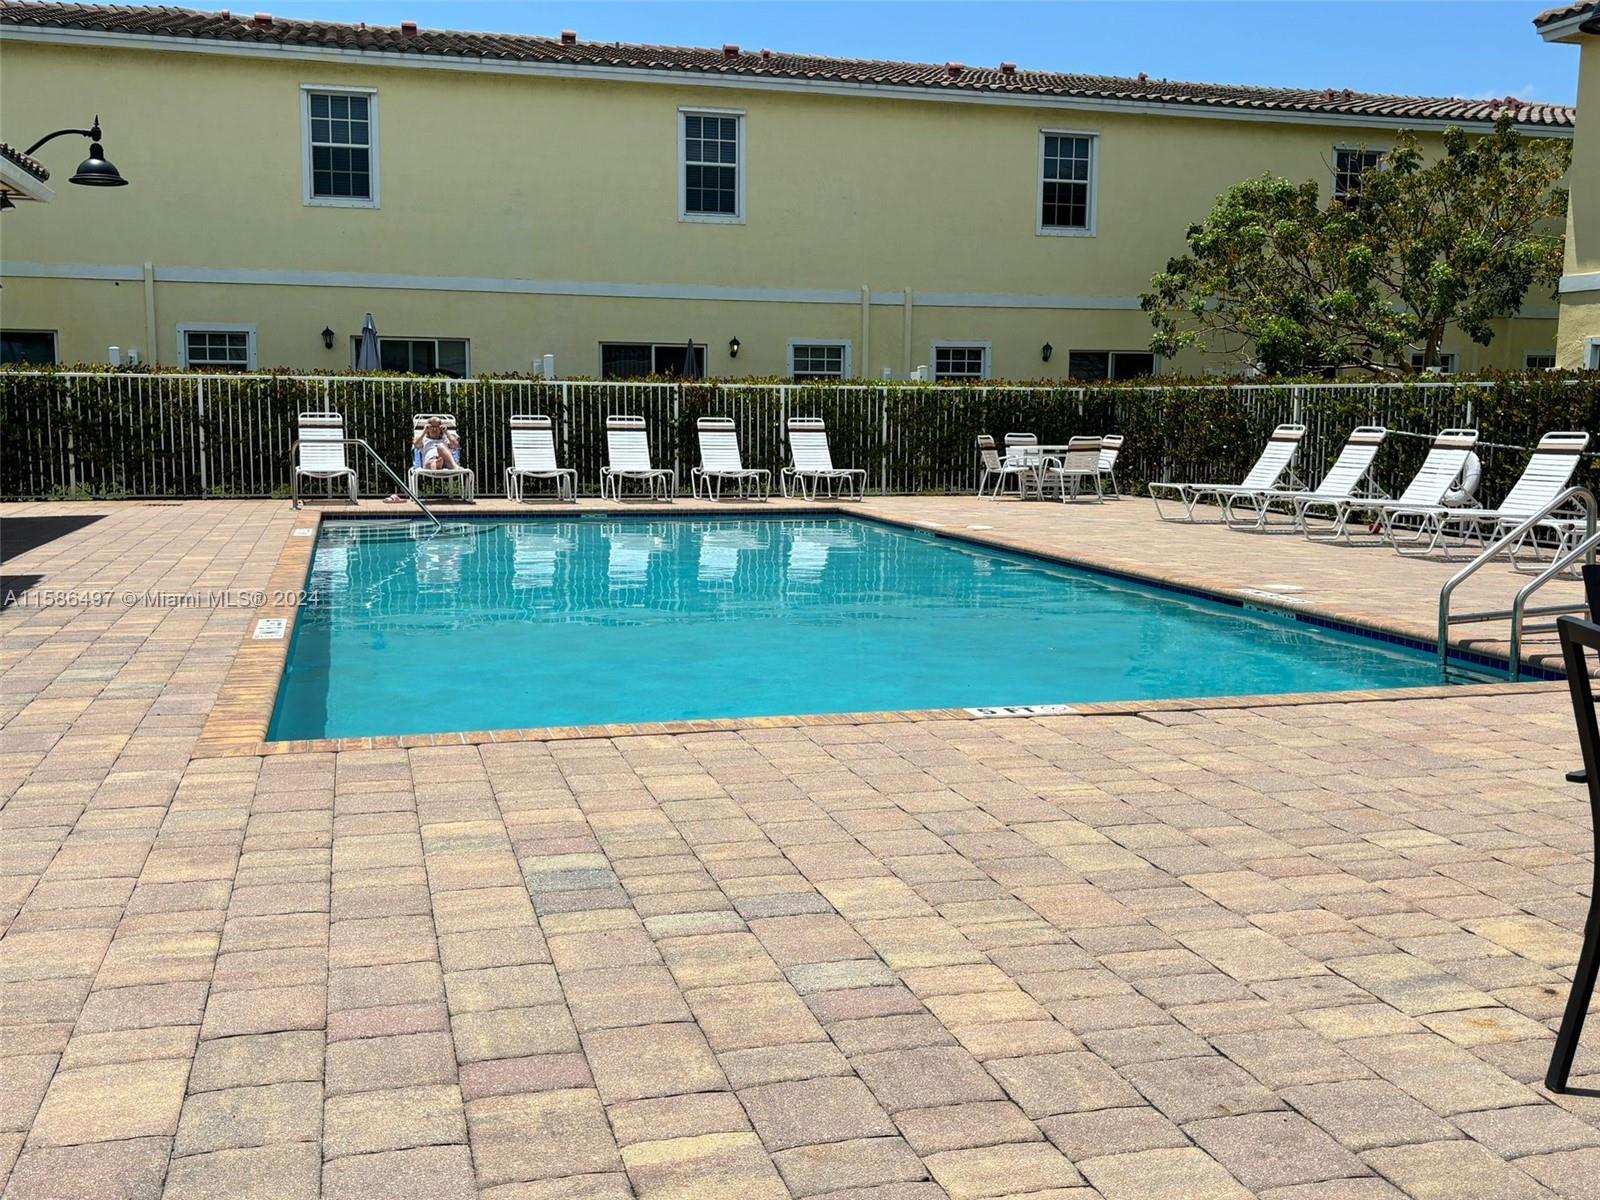 a view of swimming pool with outdoor seating